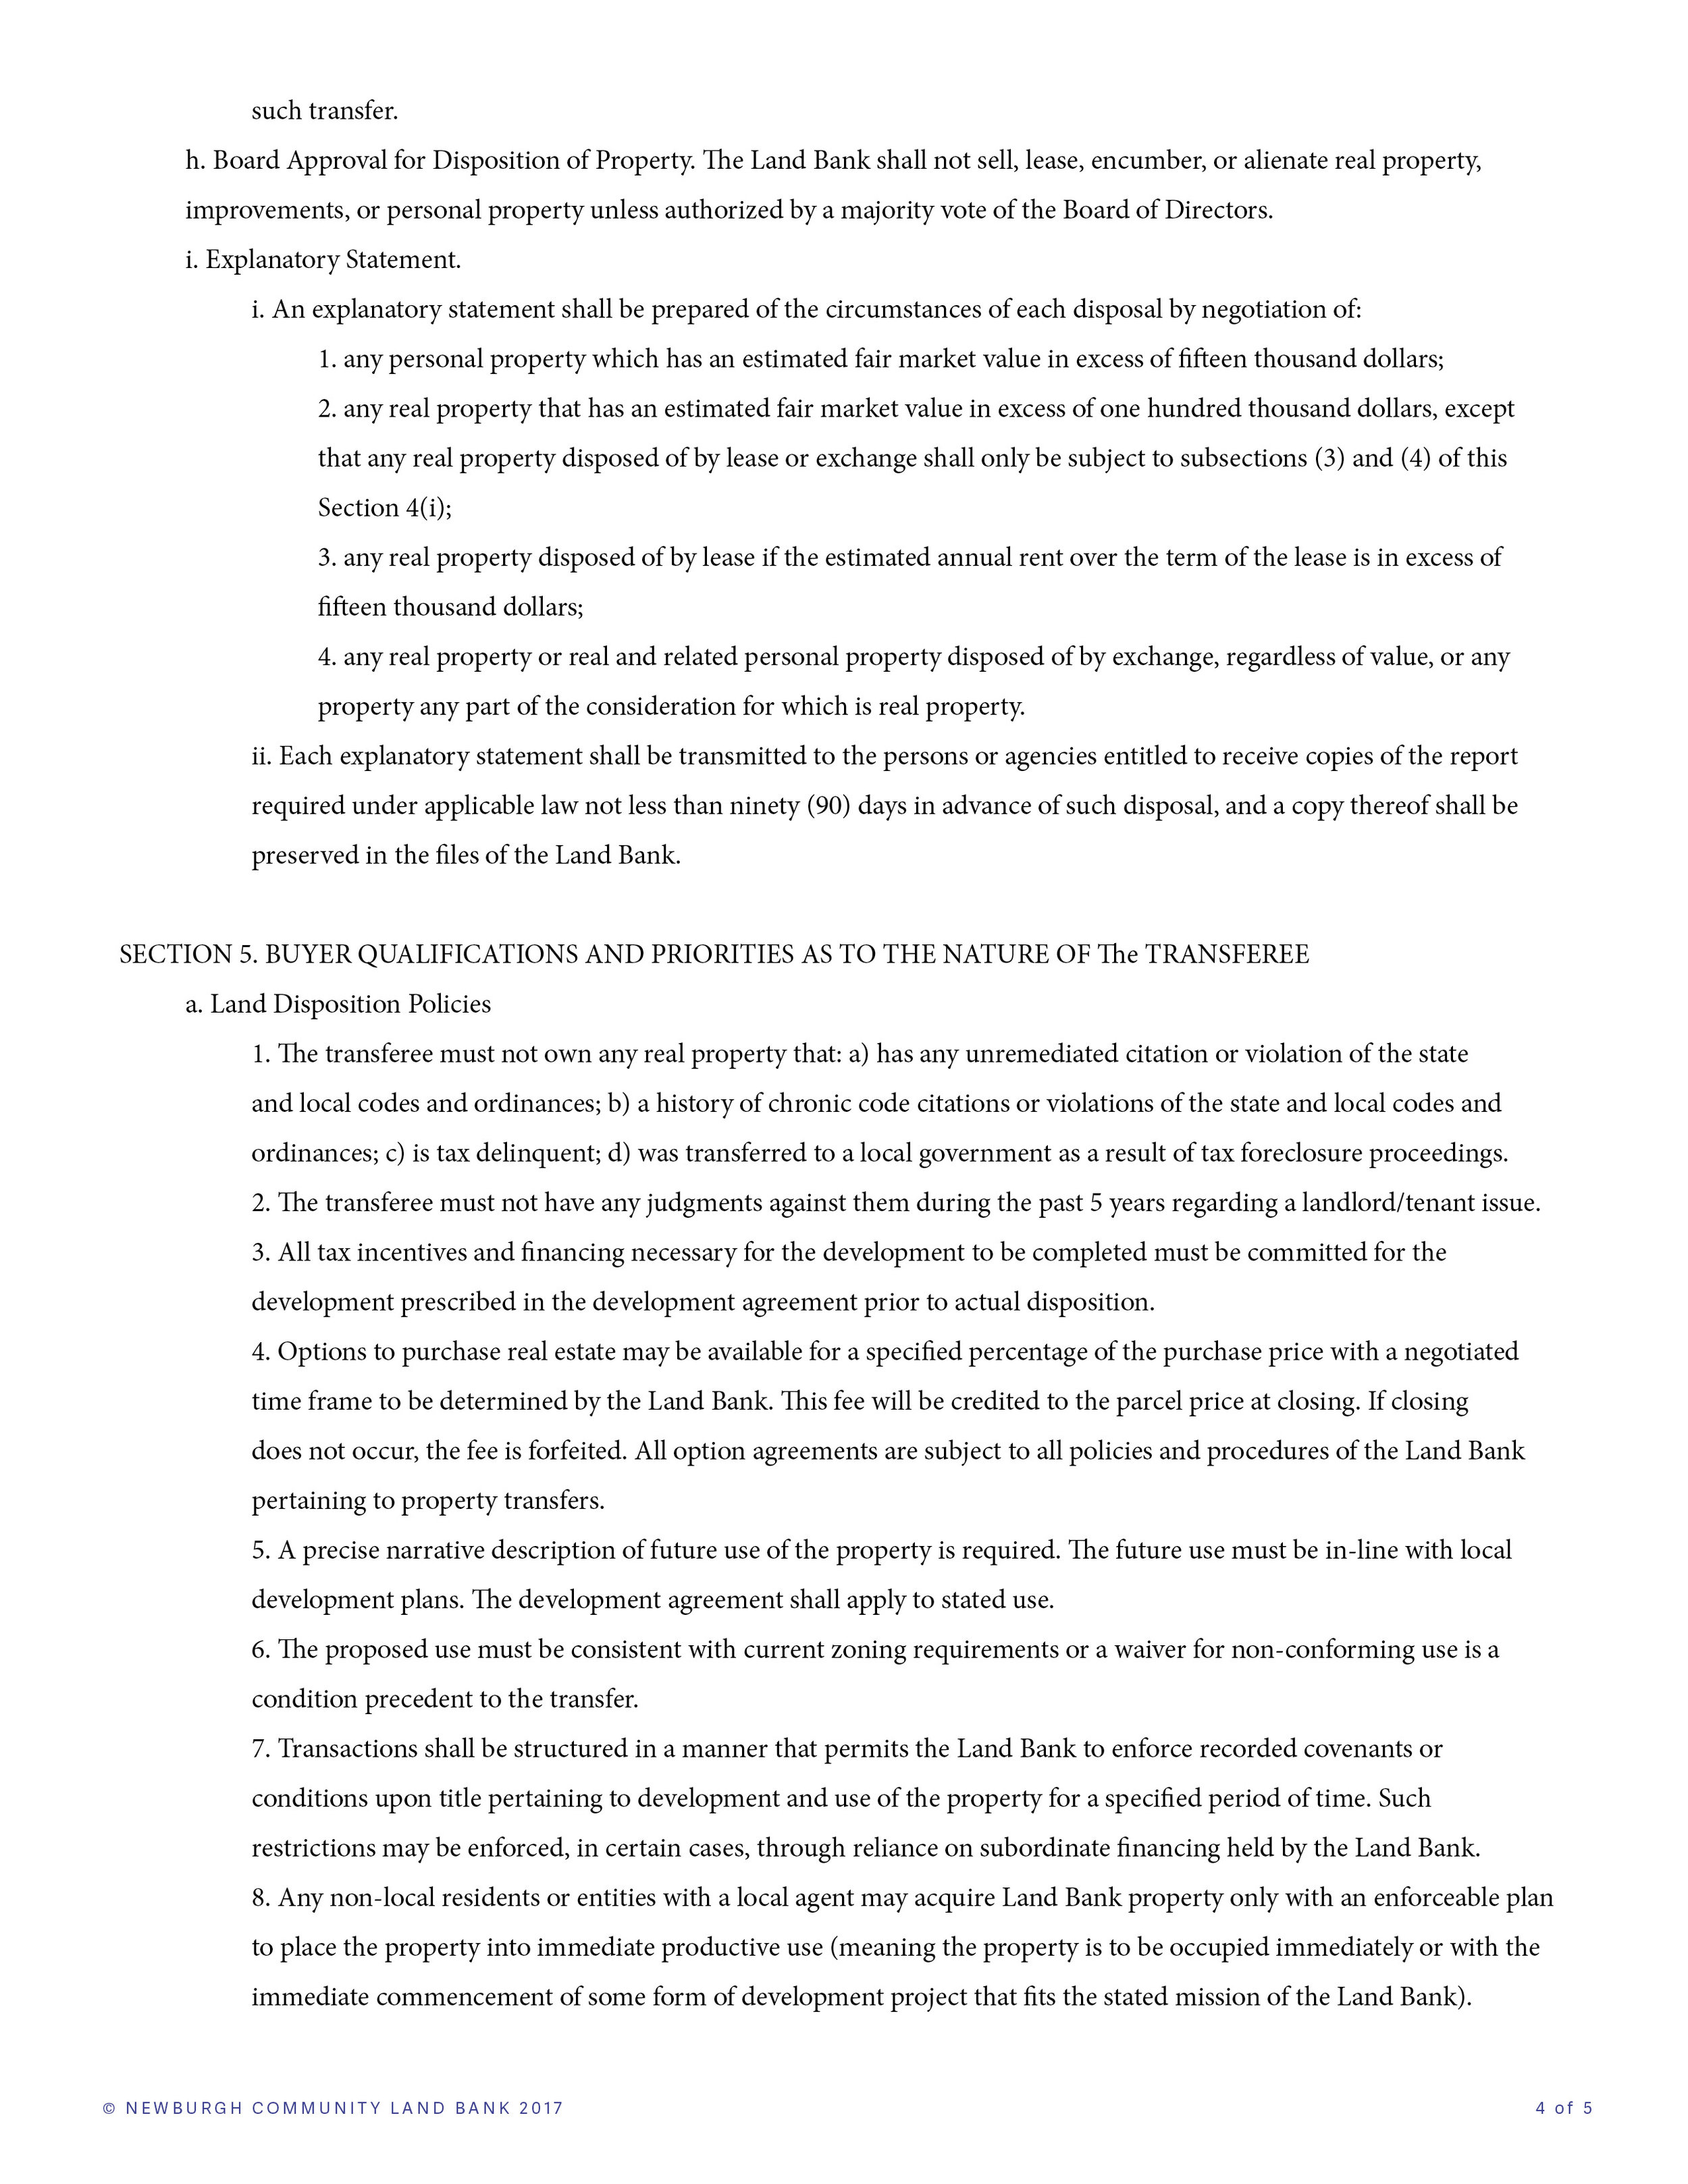 NCLB Disposition Policy4.jpg